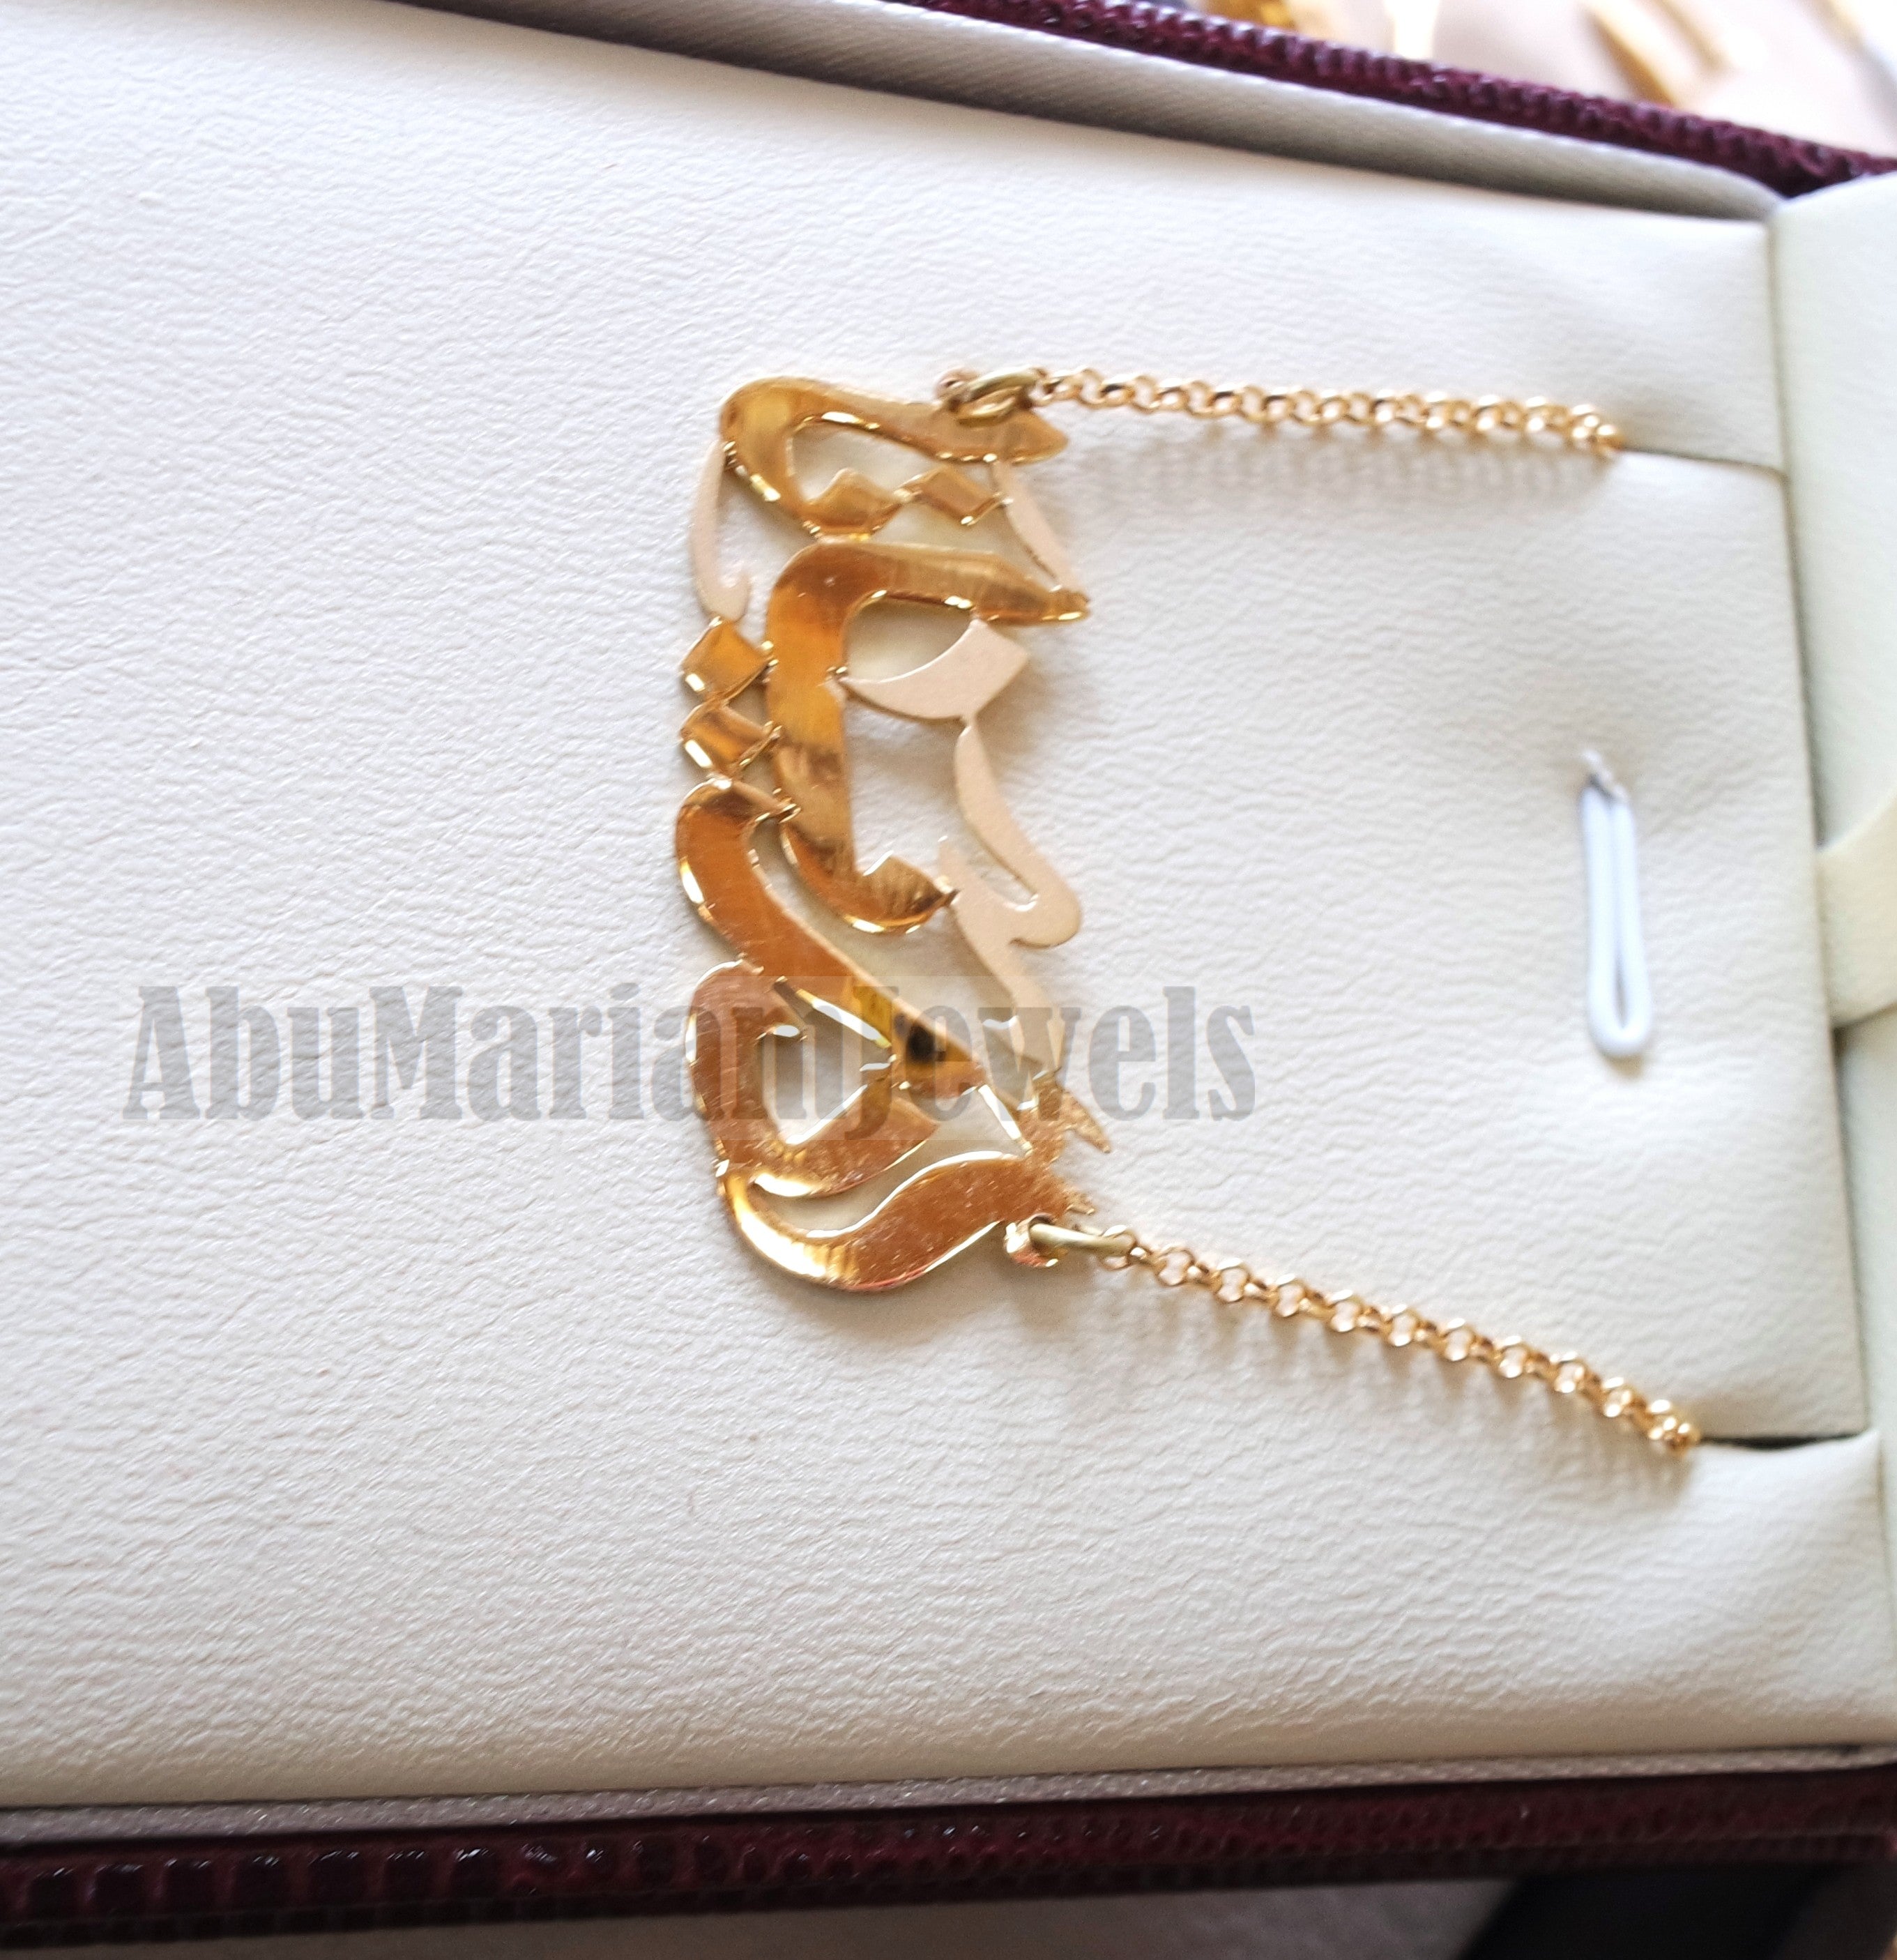 personalized customized 1 name 18 k gold arabic calligraphy pendant with chain standard , pear , rectangular or any shape fine jewelry N1004